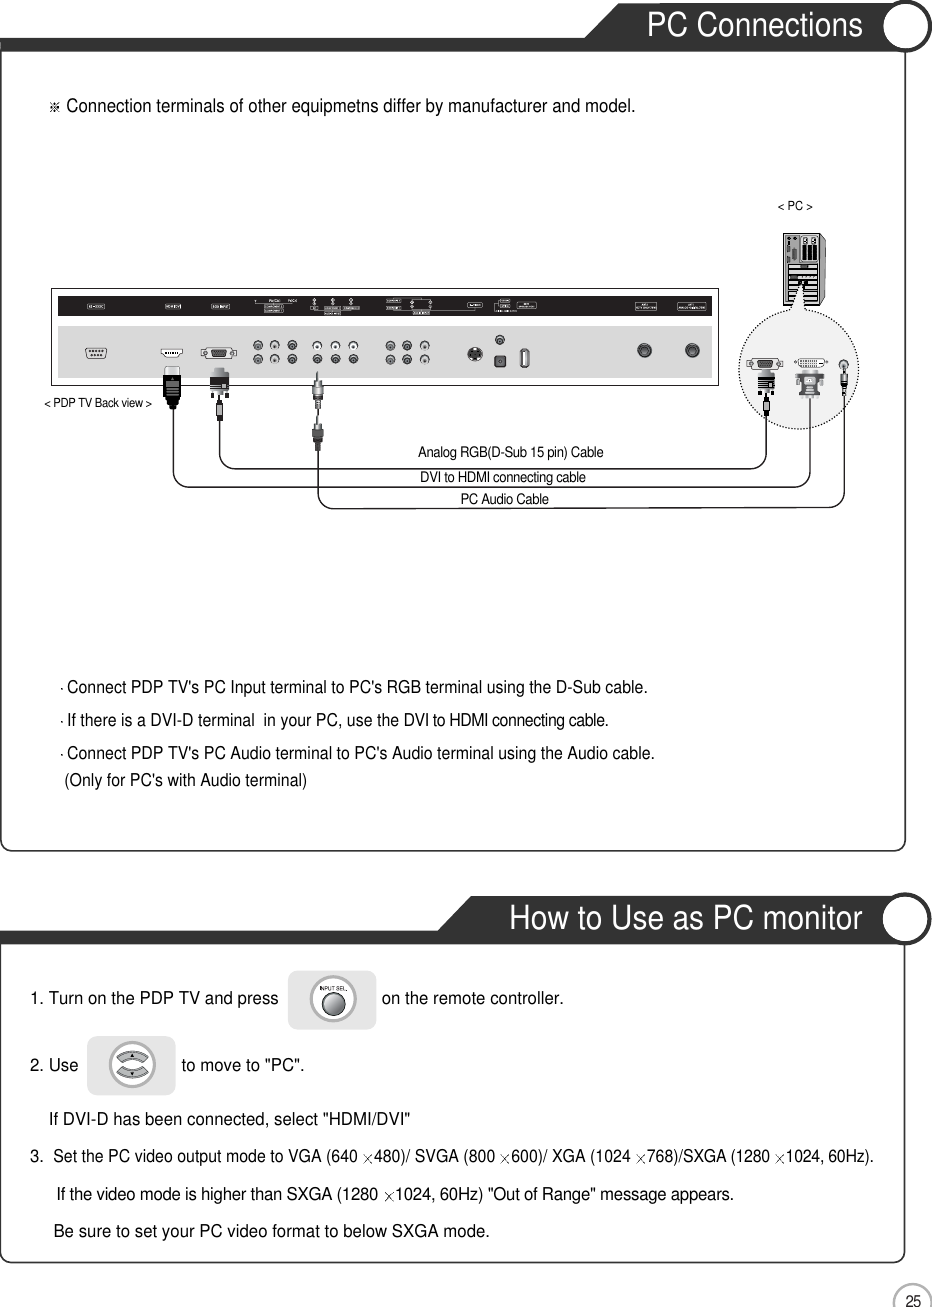 How to Use as PC monitor25PC ConnectionsConnectionConnect PDP TV&apos;s PC Input terminal to PC&apos;s RGB terminal using the D-Sub cable.If there is a DVI-D terminal  in your PC, use the DVI to HDMI connecting cable.Connect PDP TV&apos;s PC Audio terminal to PC&apos;s Audio terminal using the Audio cable.(Only for PC&apos;s with Audio terminal)1. Turn on the PDP TV and press                      on the remote controller.2. Use                      to move to &quot;PC&quot;.If DVI-D has been connected, select &quot;HDMI/DVI&quot;3.  Set the PC video output mode to VGA (640 480)/ SVGA (800 600)/ XGA (1024 768)/SXGA (1280 1024, 60Hz).If the video mode is higher than SXGA (1280 1024, 60Hz) &quot;Out of Range&quot; message appears.Be sure to set your PC video format to below SXGA mode.  &lt; PDP TV Back view &gt;Connection terminals of other equipmetns differ by manufacturer and model.PC Audio CableAnalog RGB(D-Sub 15 pin) CableDVI to HDMI connecting cable&lt; PC &gt;